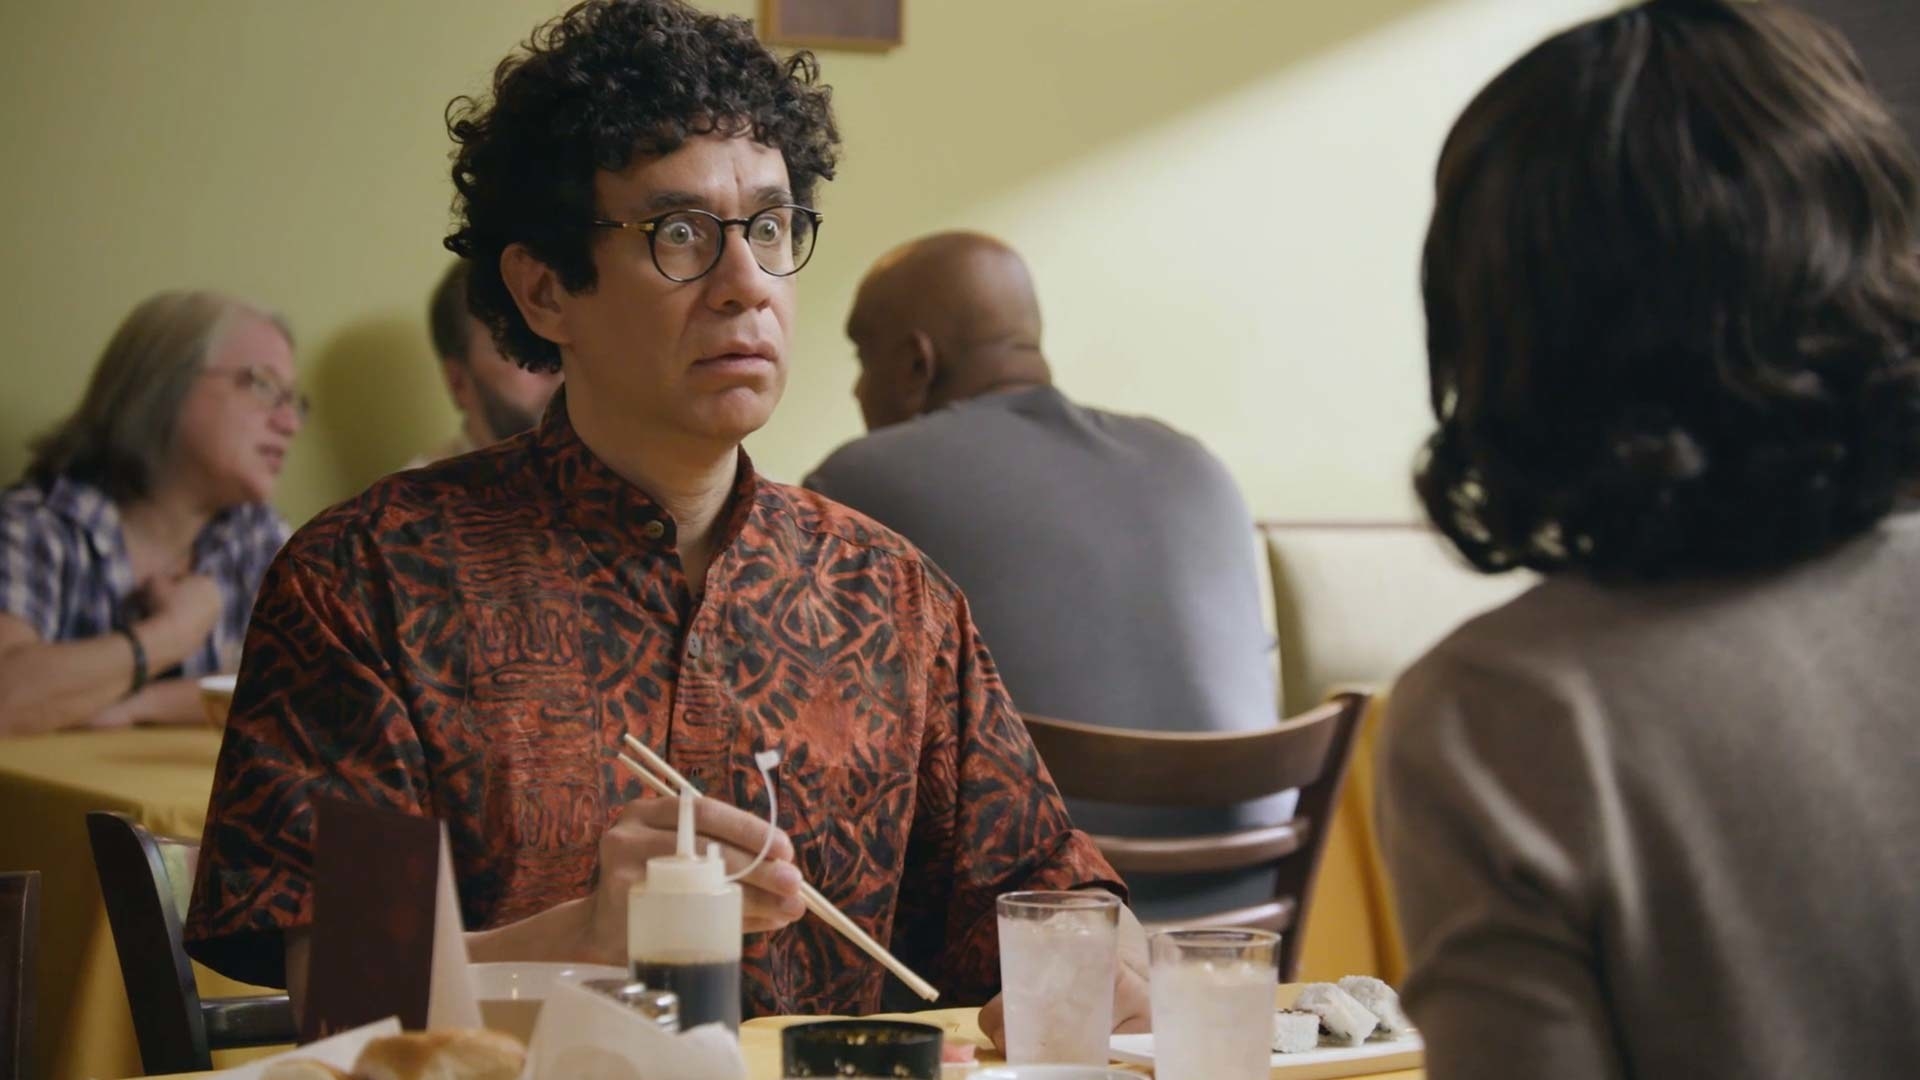 Fred Armisen in Portlandia eating dinner with circular glasses on looking horrified 